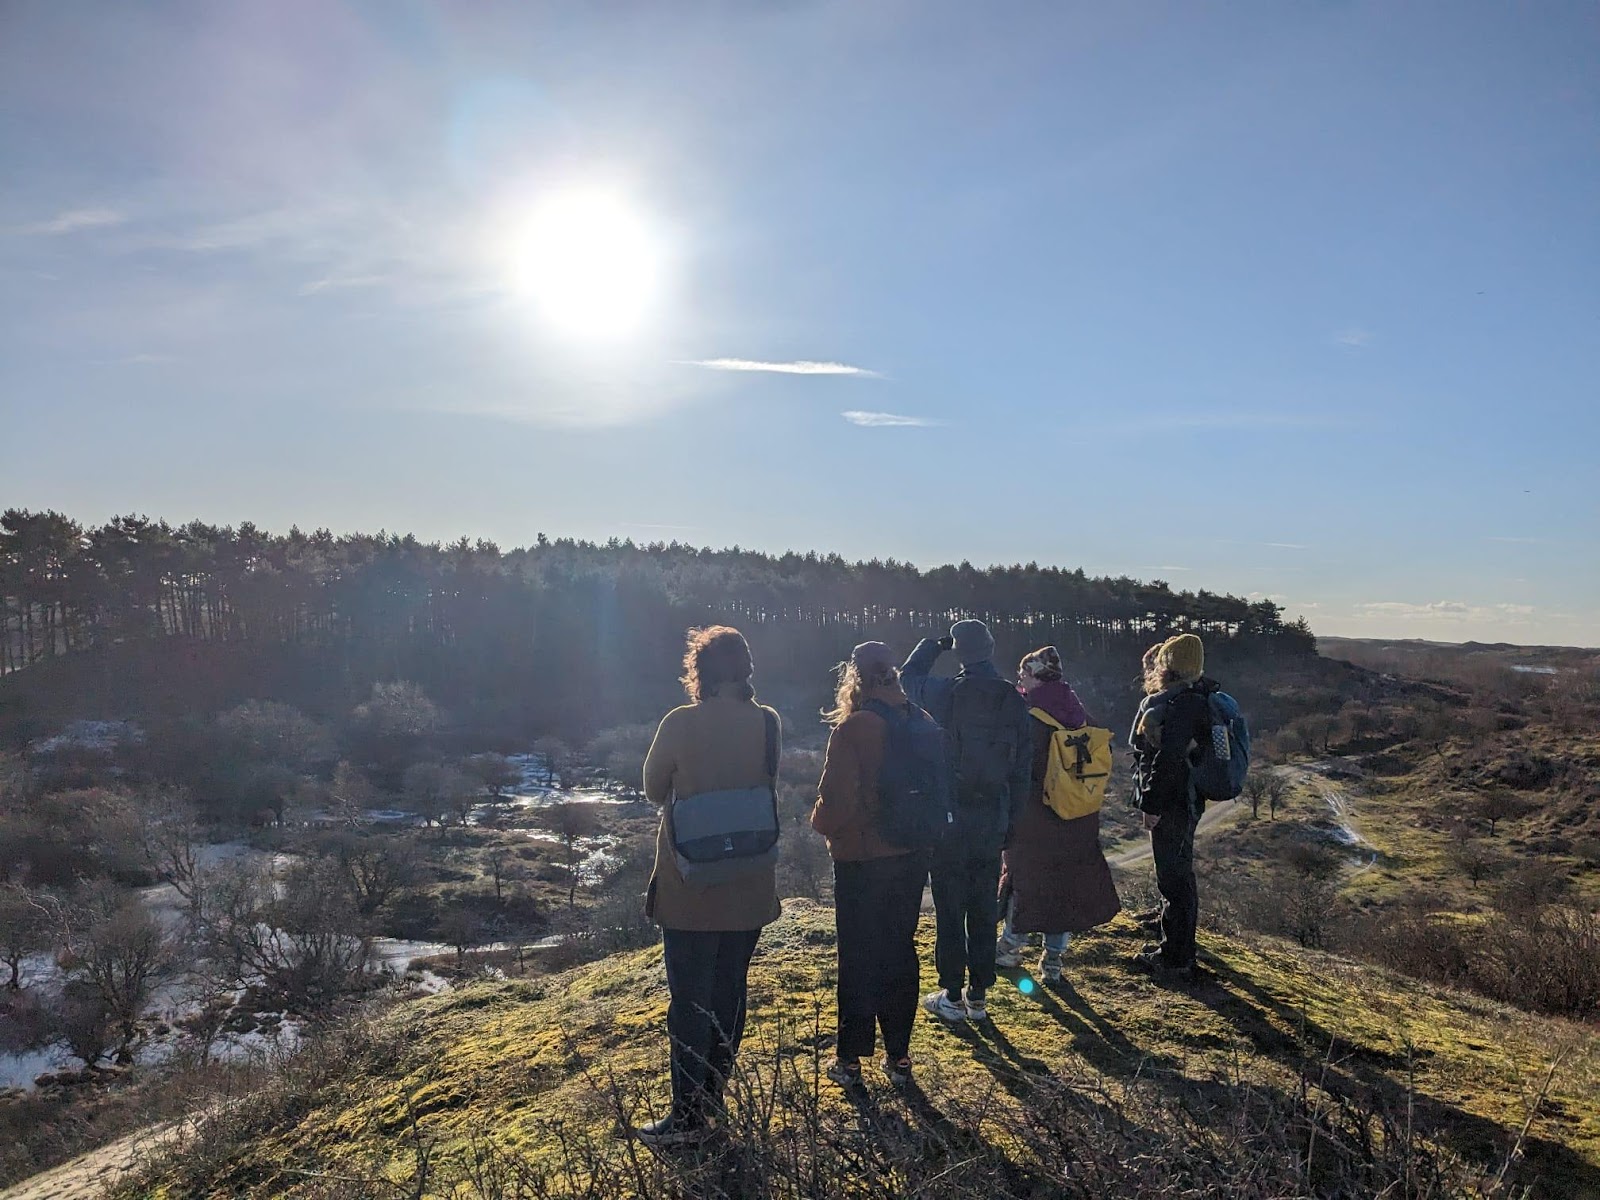 A group of people standing on a hill looking at the sun

Description automatically generated